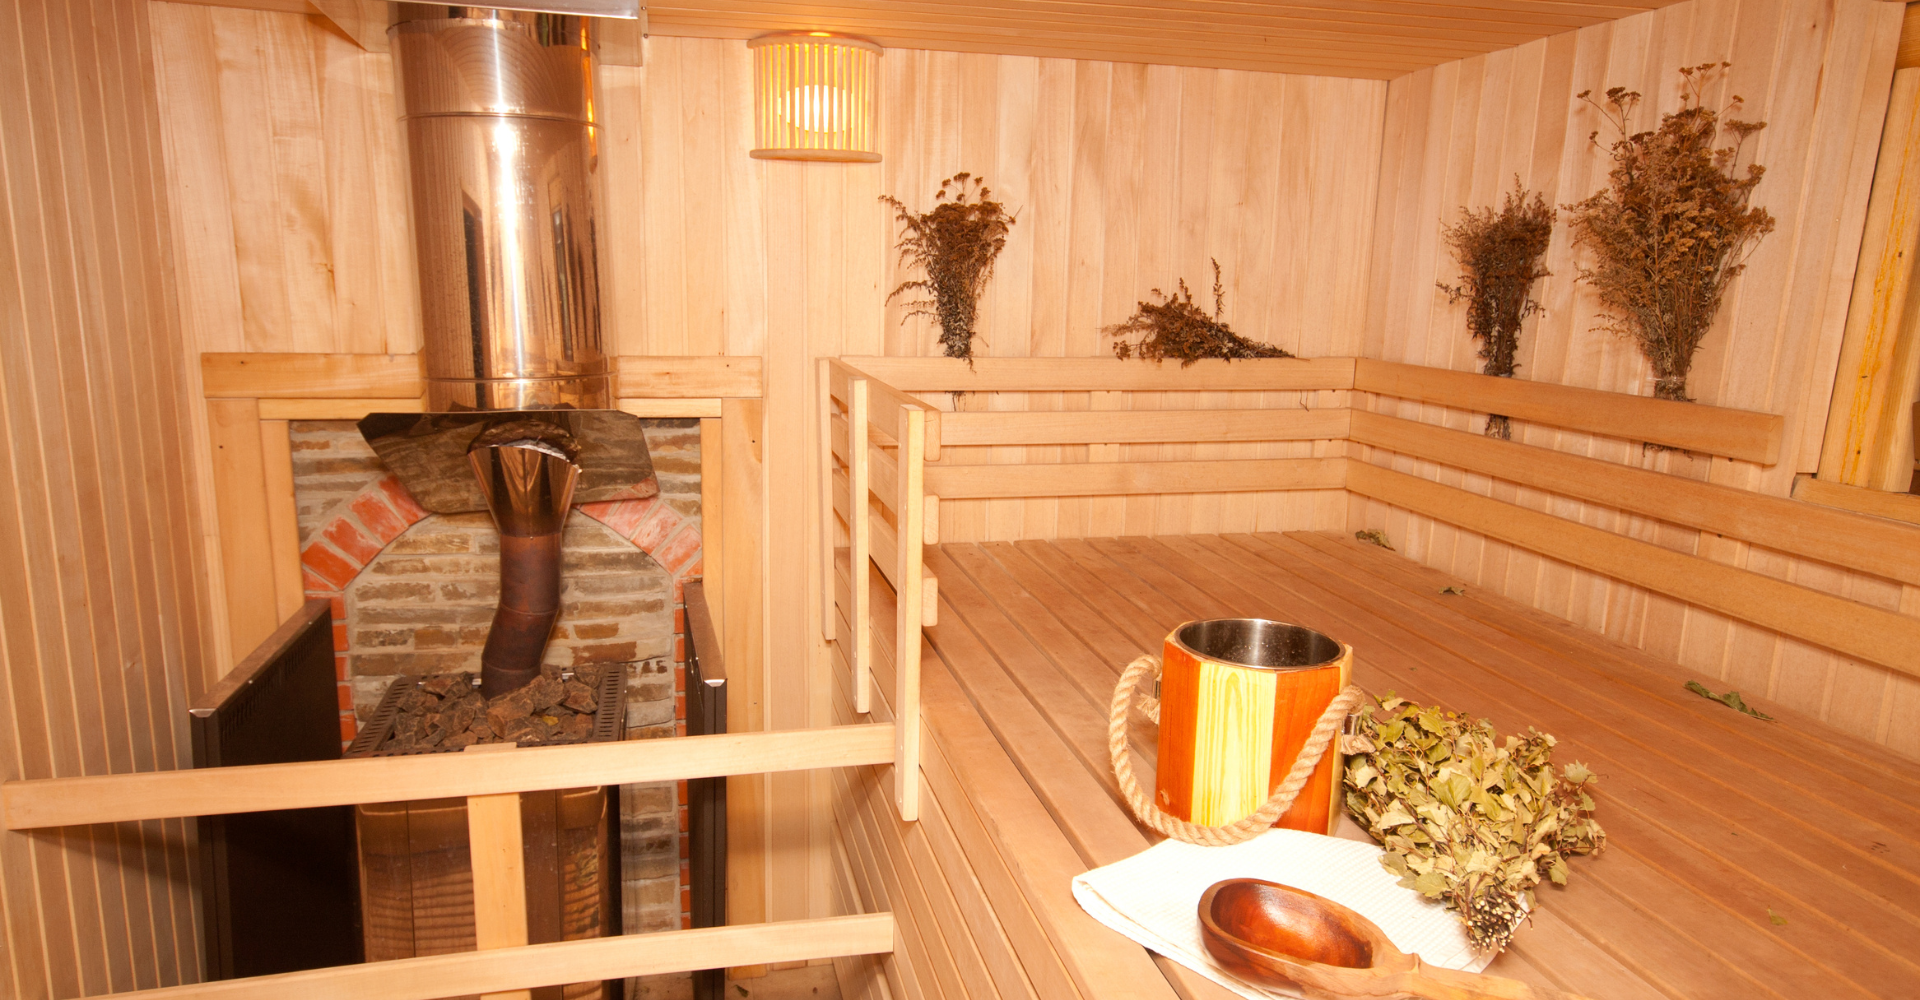 Can Saunas Really Help Remove Toxins? Explore the Detox Benefits of Infrared Saunas